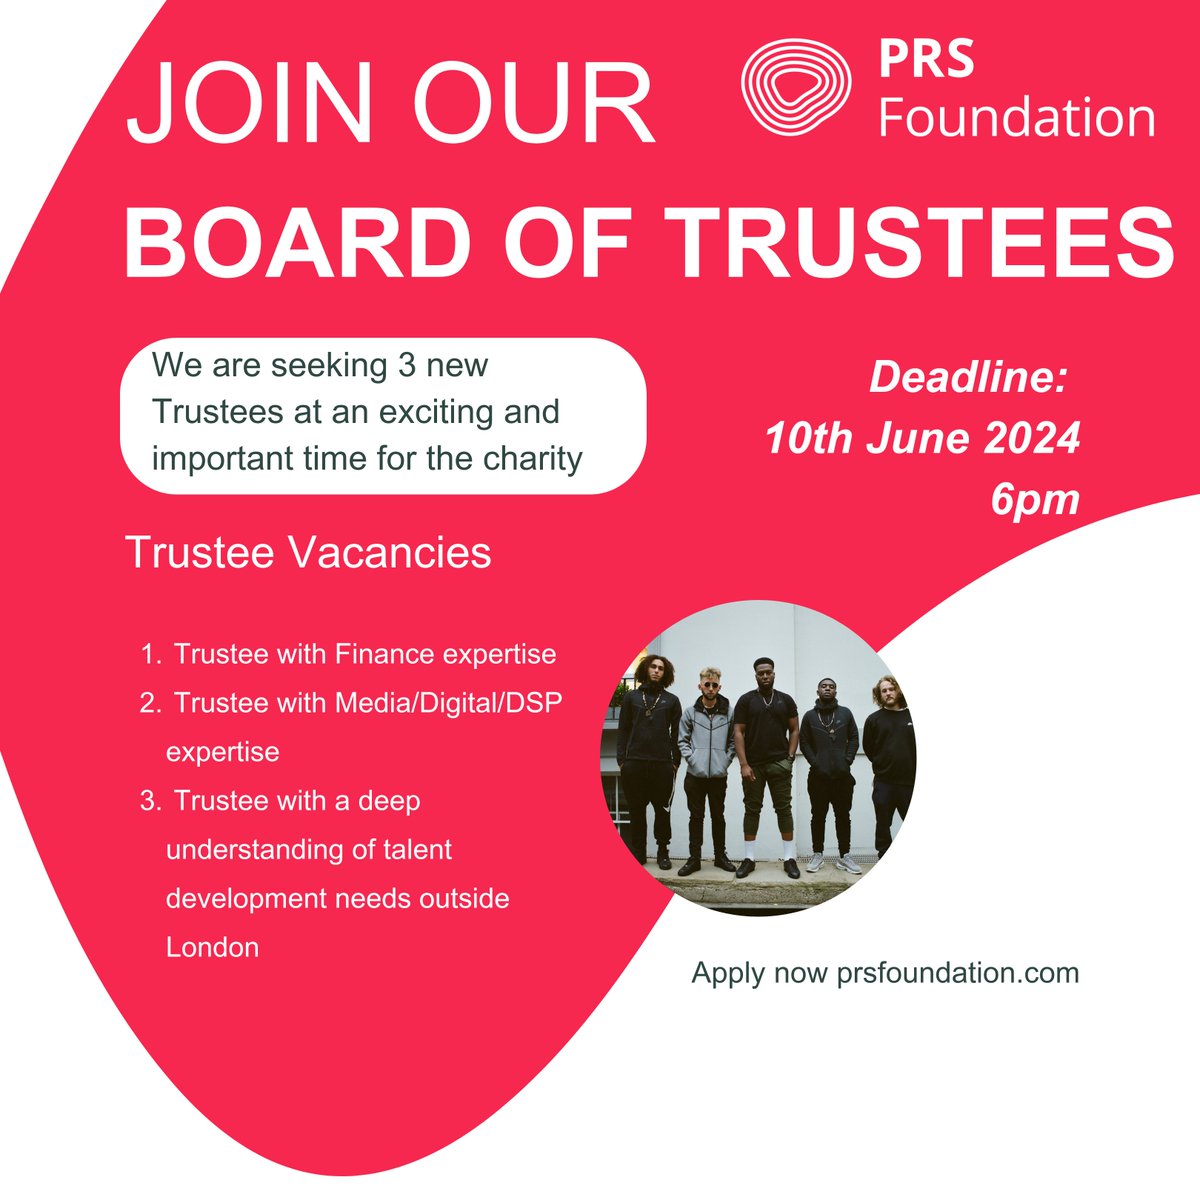 PRS Foundation is seeking 3 x new Trustees at exciting & important time as we approach our 25th Anniversary 🎉 We seek trustees with finance expertise, media/digital/DSP expertise and/or a deep understanding of talent development needs outside London prsfoundation.com/prs-foundation…